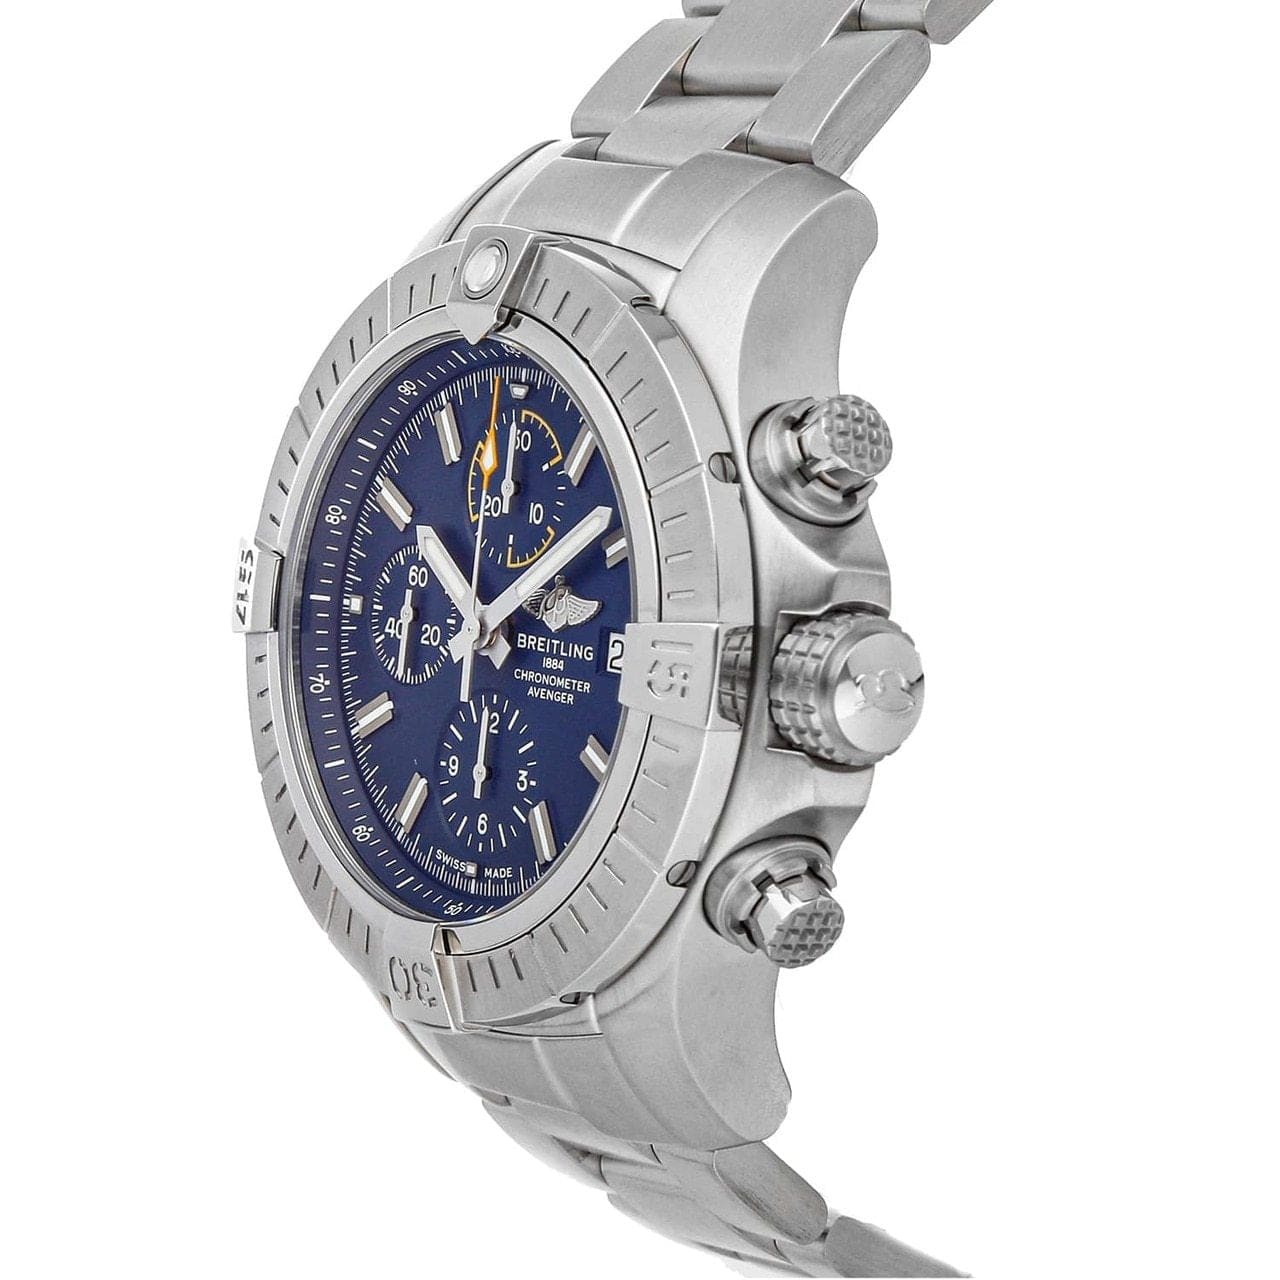 Breitling A13317101C1A1 Avenger Chronograph Stainless Steel Blue Dial Men's Chronograph Watch 842047179543